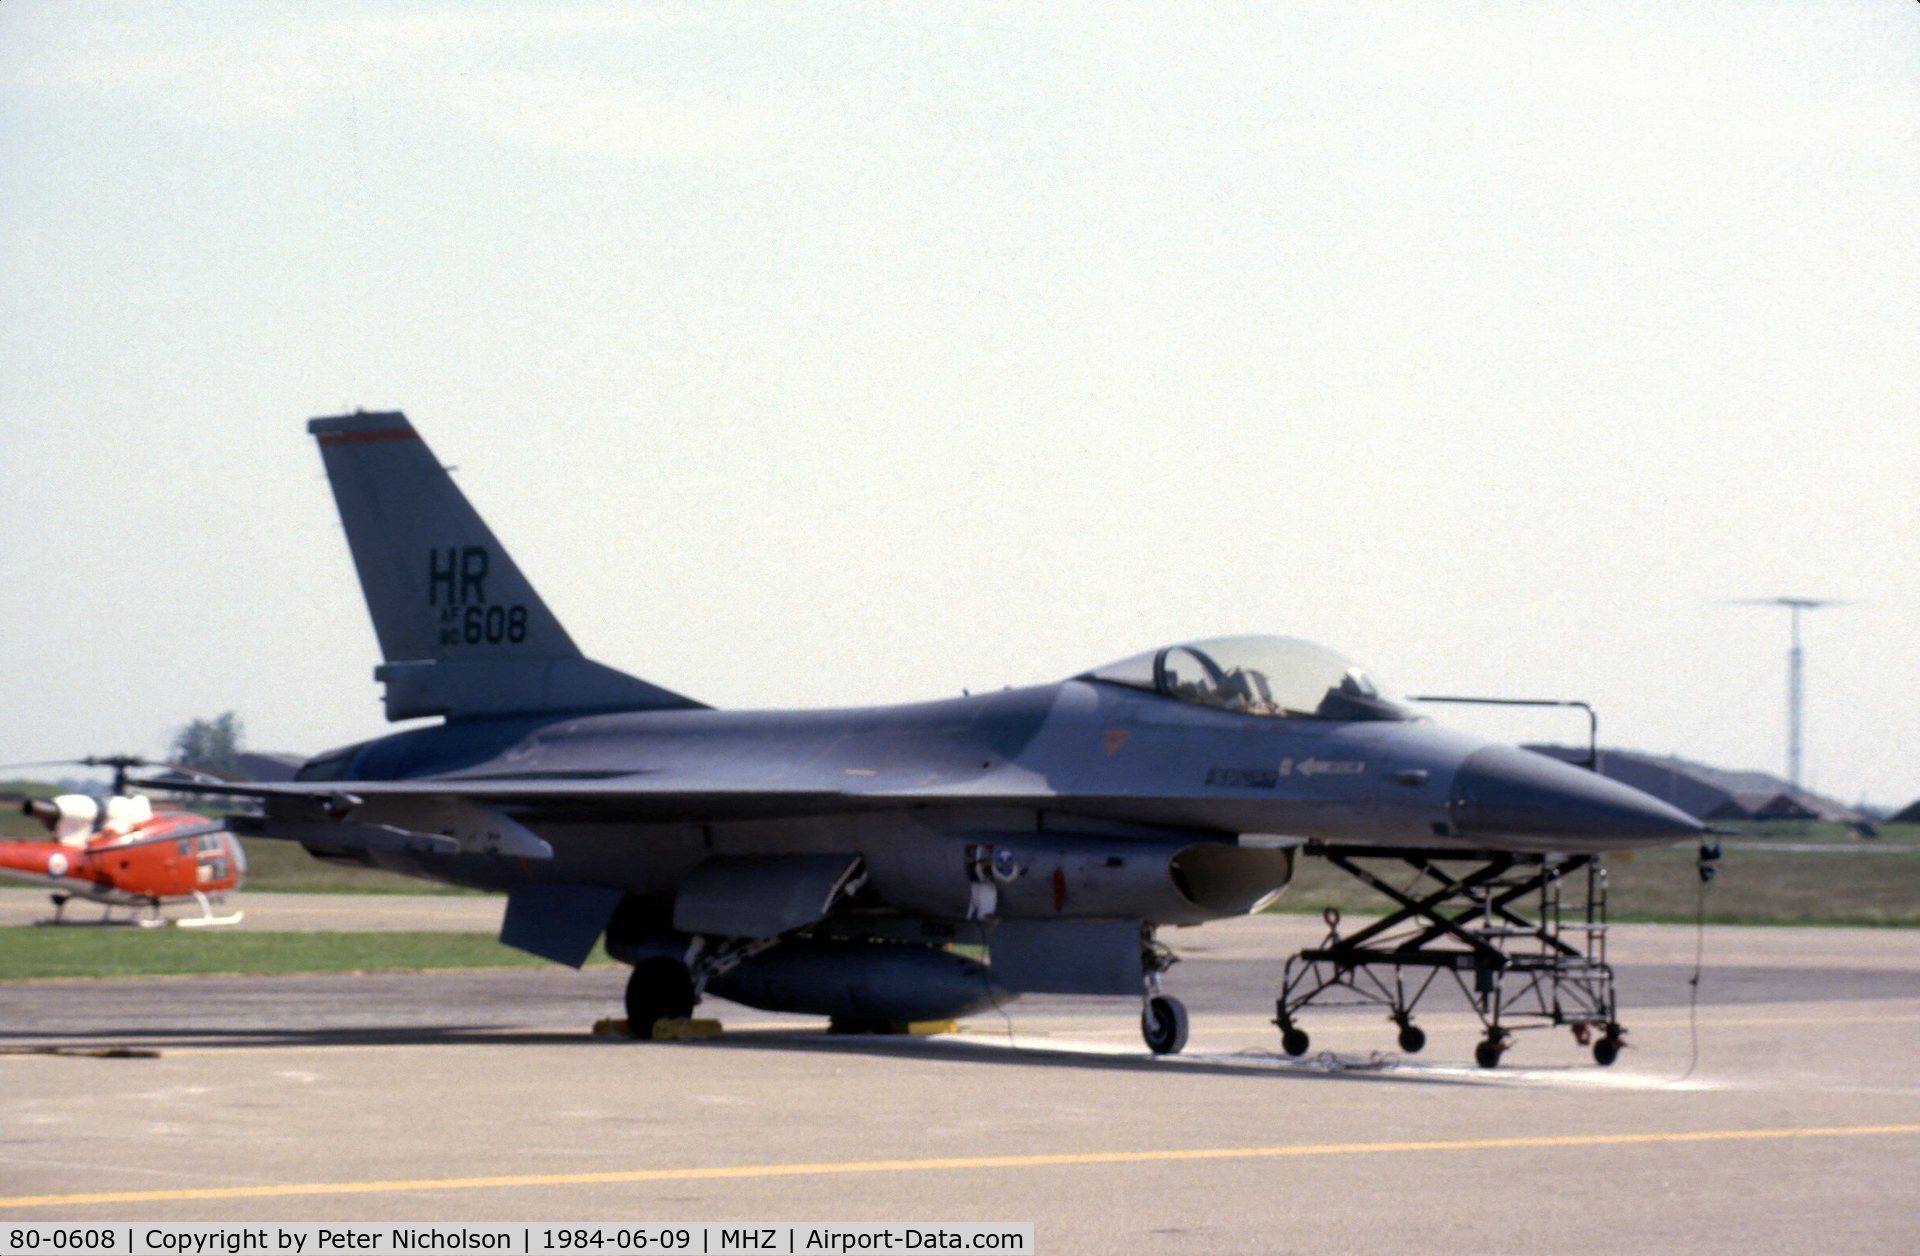 80-0608, 1980 General Dynamics F-16A Fighting Falcon C/N 61-329, F-16A Falcon of 496 Tactical Fighter Squadron/56 Tactical Fighter Wing at the 1984 RAF Mildenhall Air Fete.